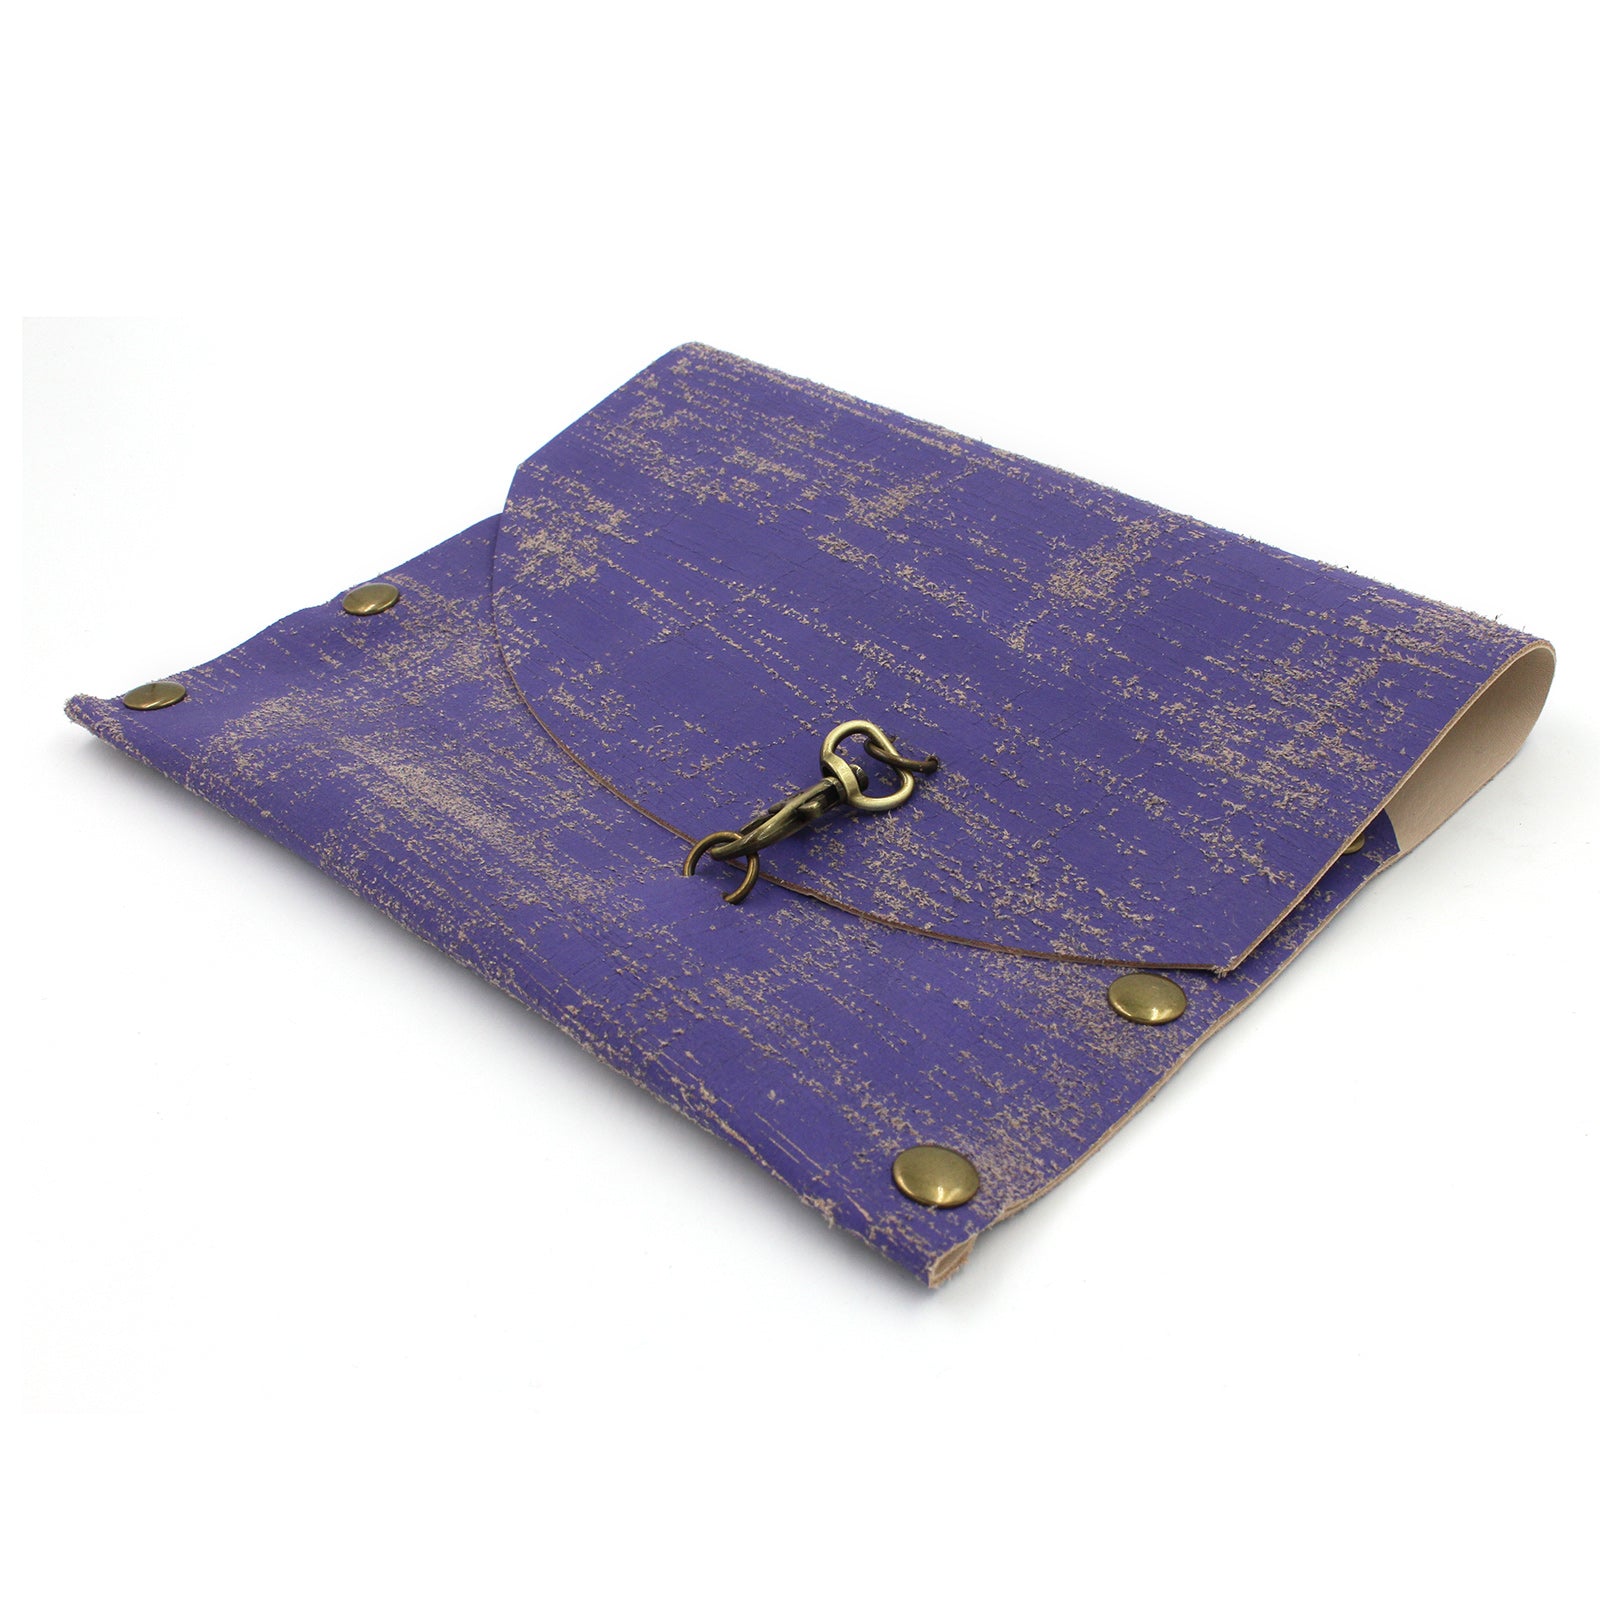 Hand-painted Textured Purple Leather Clutch